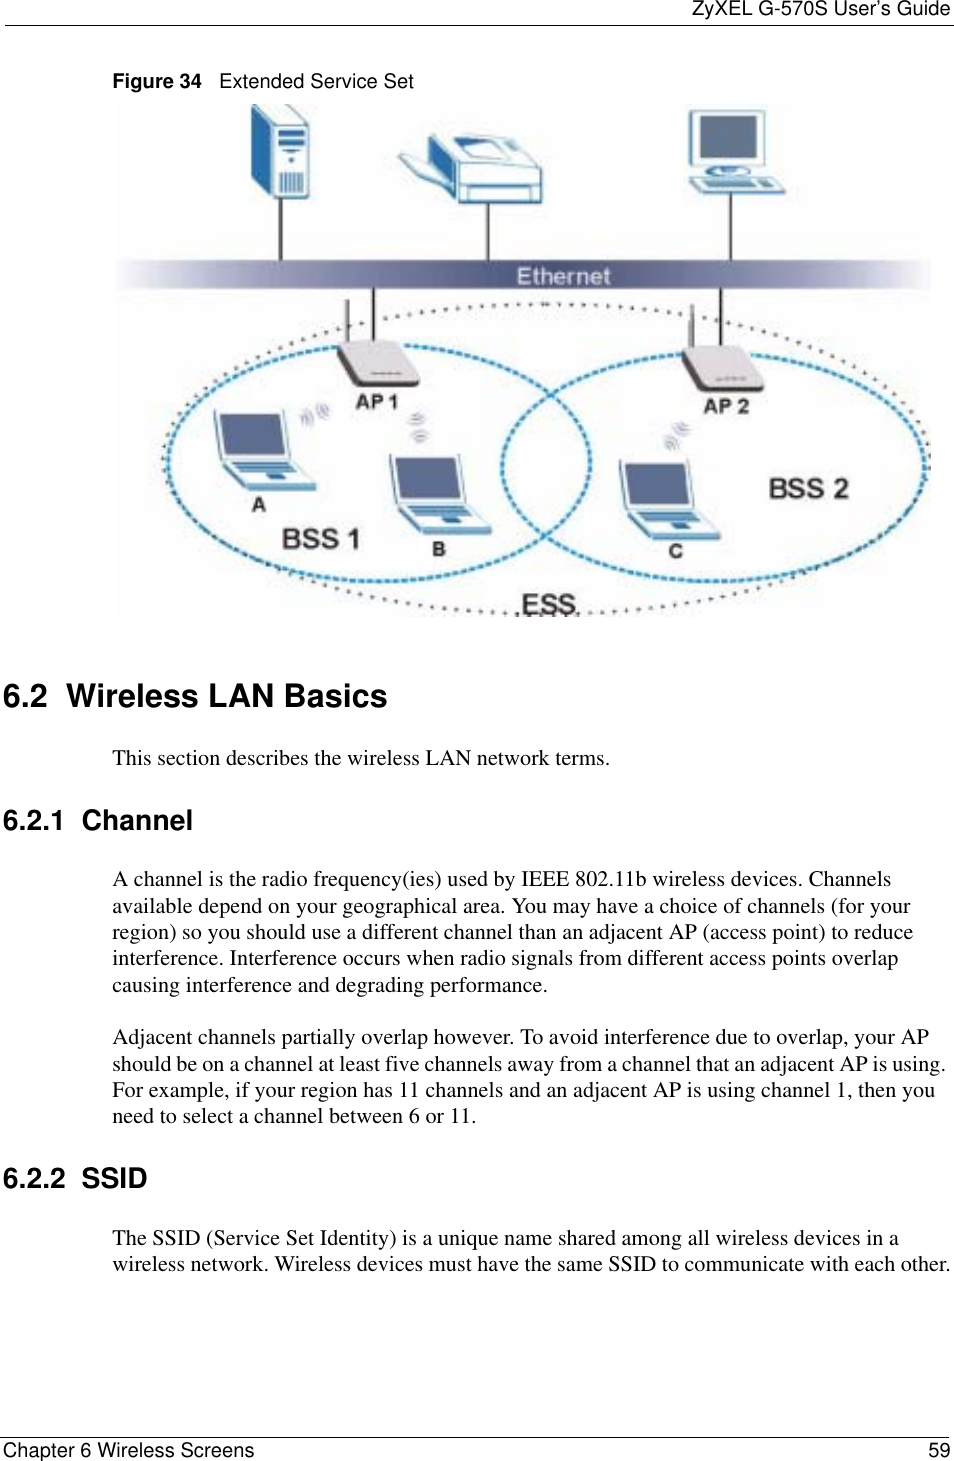 ZyXEL G-570S User’s GuideChapter 6 Wireless Screens 59Figure 34   Extended Service Set6.2  Wireless LAN Basics This section describes the wireless LAN network terms.6.2.1  ChannelA channel is the radio frequency(ies) used by IEEE 802.11b wireless devices. Channels available depend on your geographical area. You may have a choice of channels (for your region) so you should use a different channel than an adjacent AP (access point) to reduce interference. Interference occurs when radio signals from different access points overlap causing interference and degrading performance.Adjacent channels partially overlap however. To avoid interference due to overlap, your AP should be on a channel at least five channels away from a channel that an adjacent AP is using. For example, if your region has 11 channels and an adjacent AP is using channel 1, then you need to select a channel between 6 or 11.6.2.2  SSIDThe SSID (Service Set Identity) is a unique name shared among all wireless devices in a wireless network. Wireless devices must have the same SSID to communicate with each other.